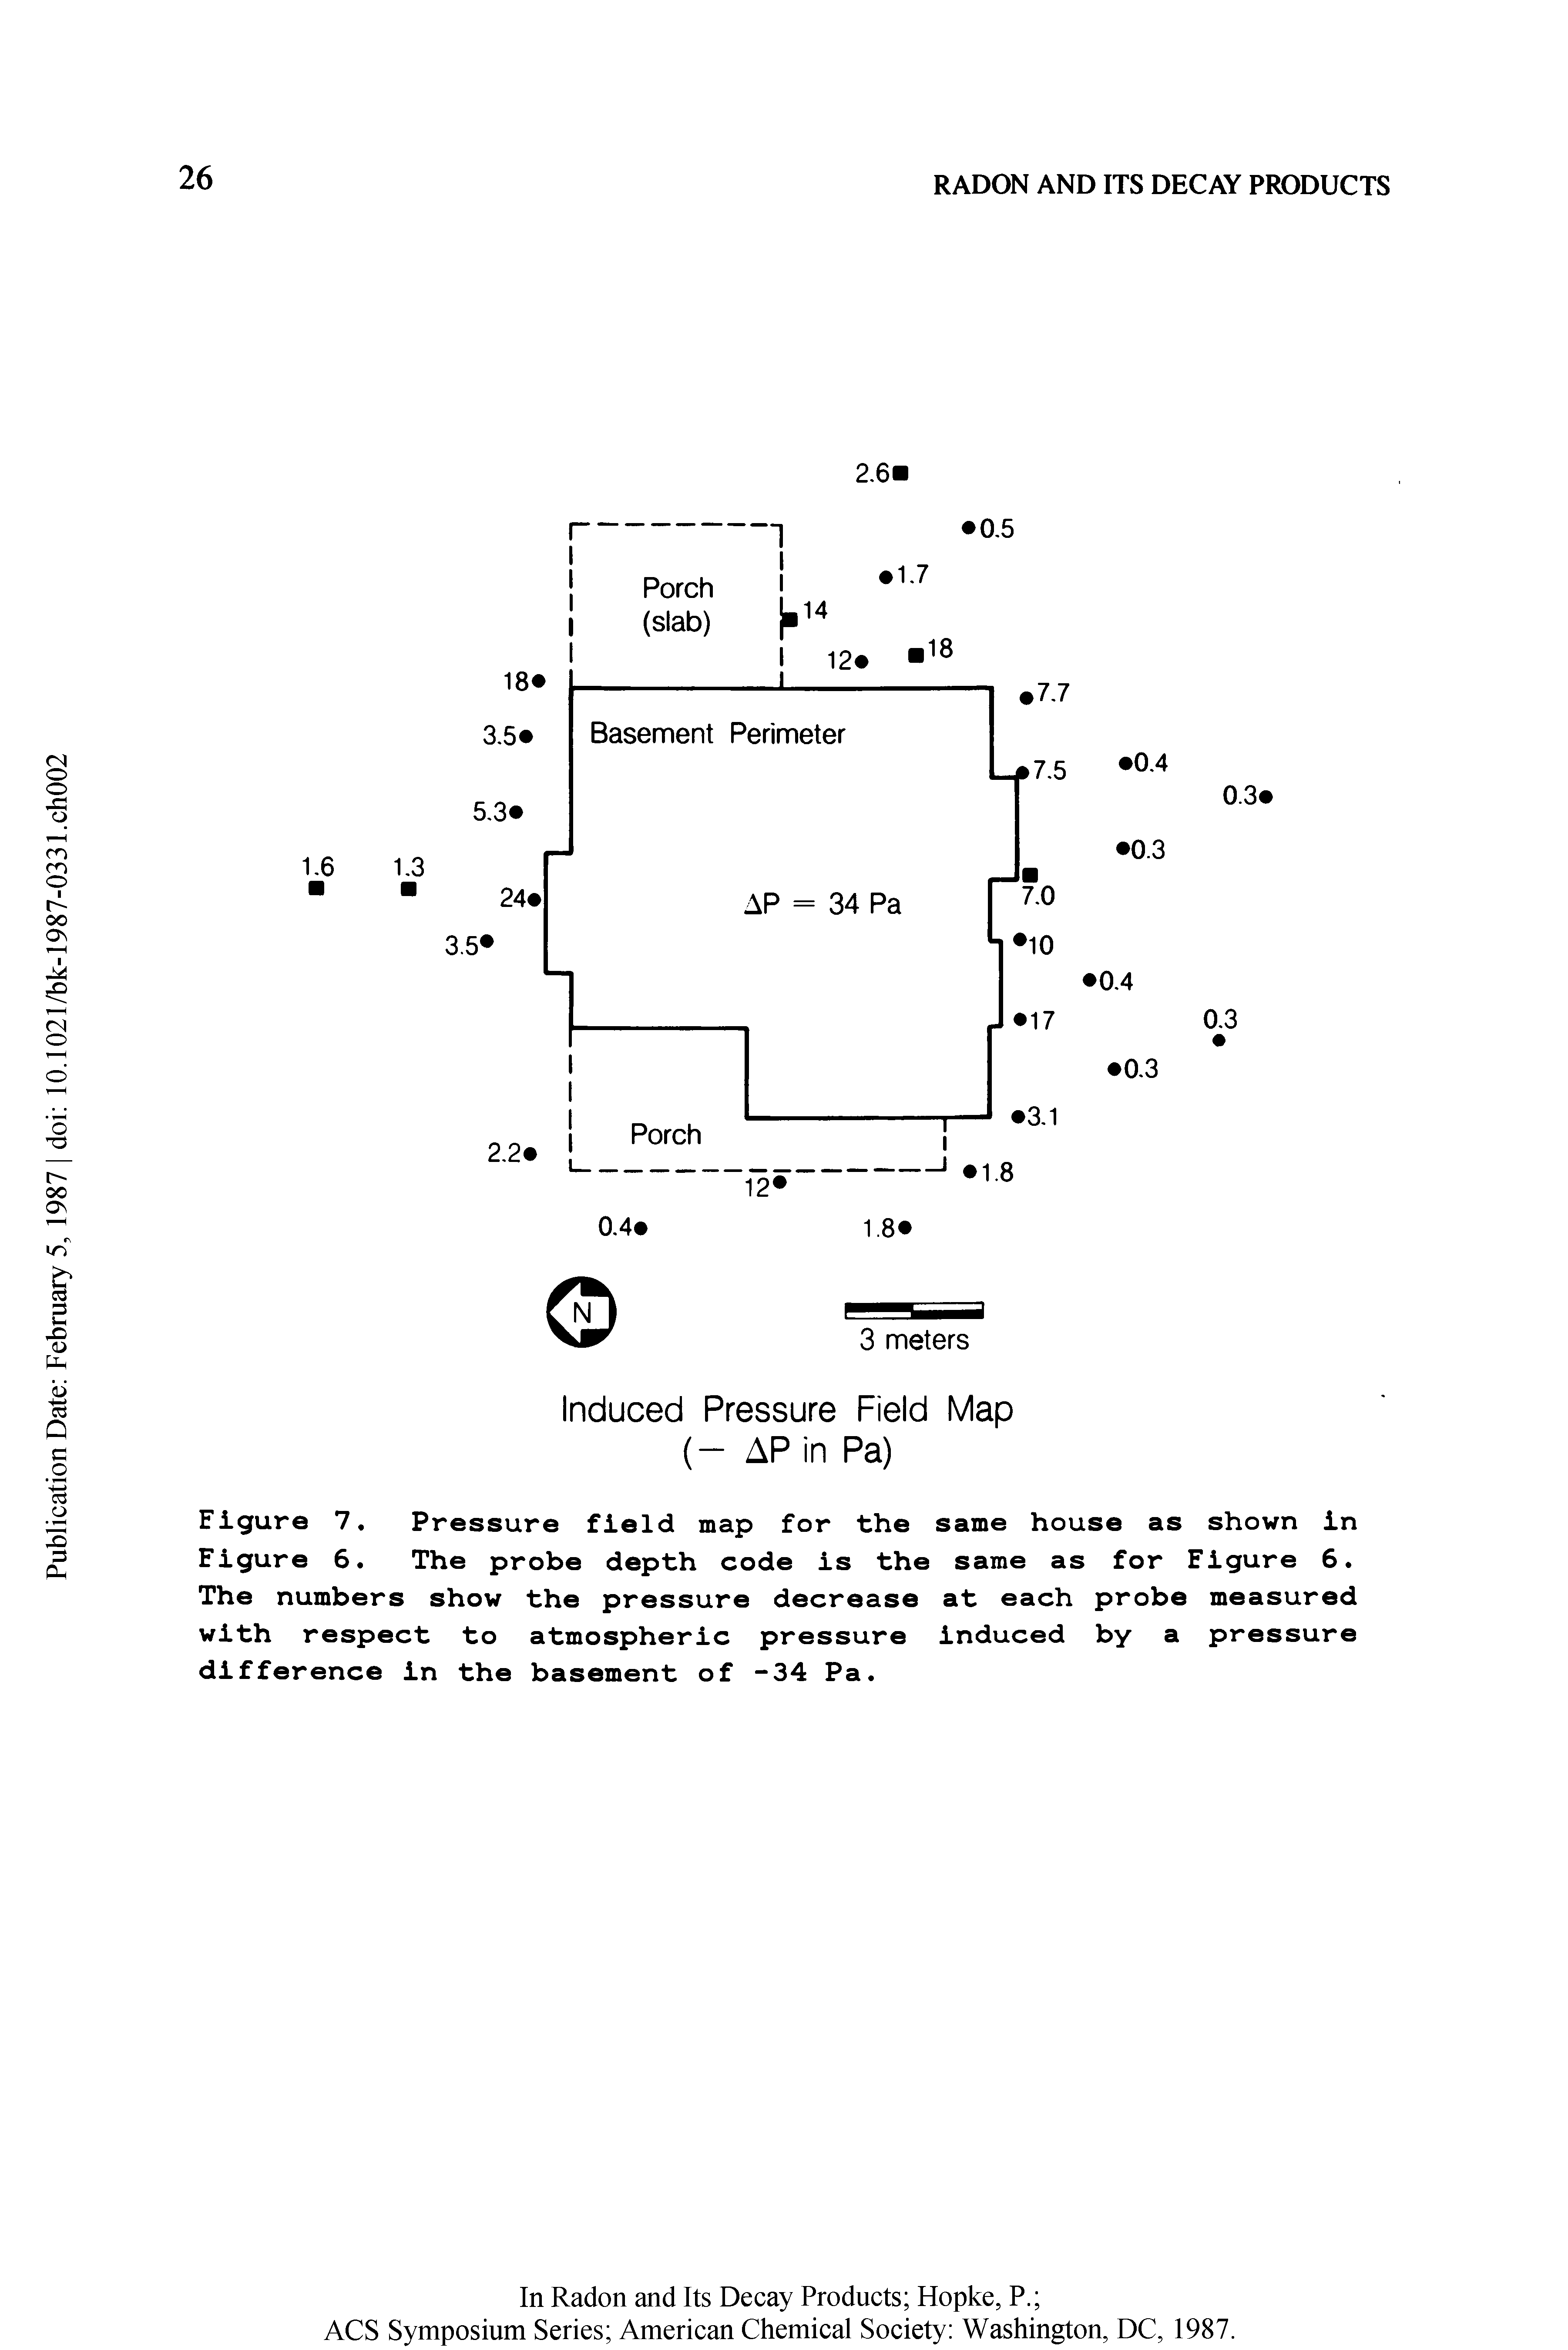 Figure 7. Pressure field map for the same house as shown in Figure 6. The probe depth code is the same as for Figure 6. The numbers show the pressure decrease at each probe measured with respect to atmospheric pressure induced by a pressure difference in the basement of -34 Pa.